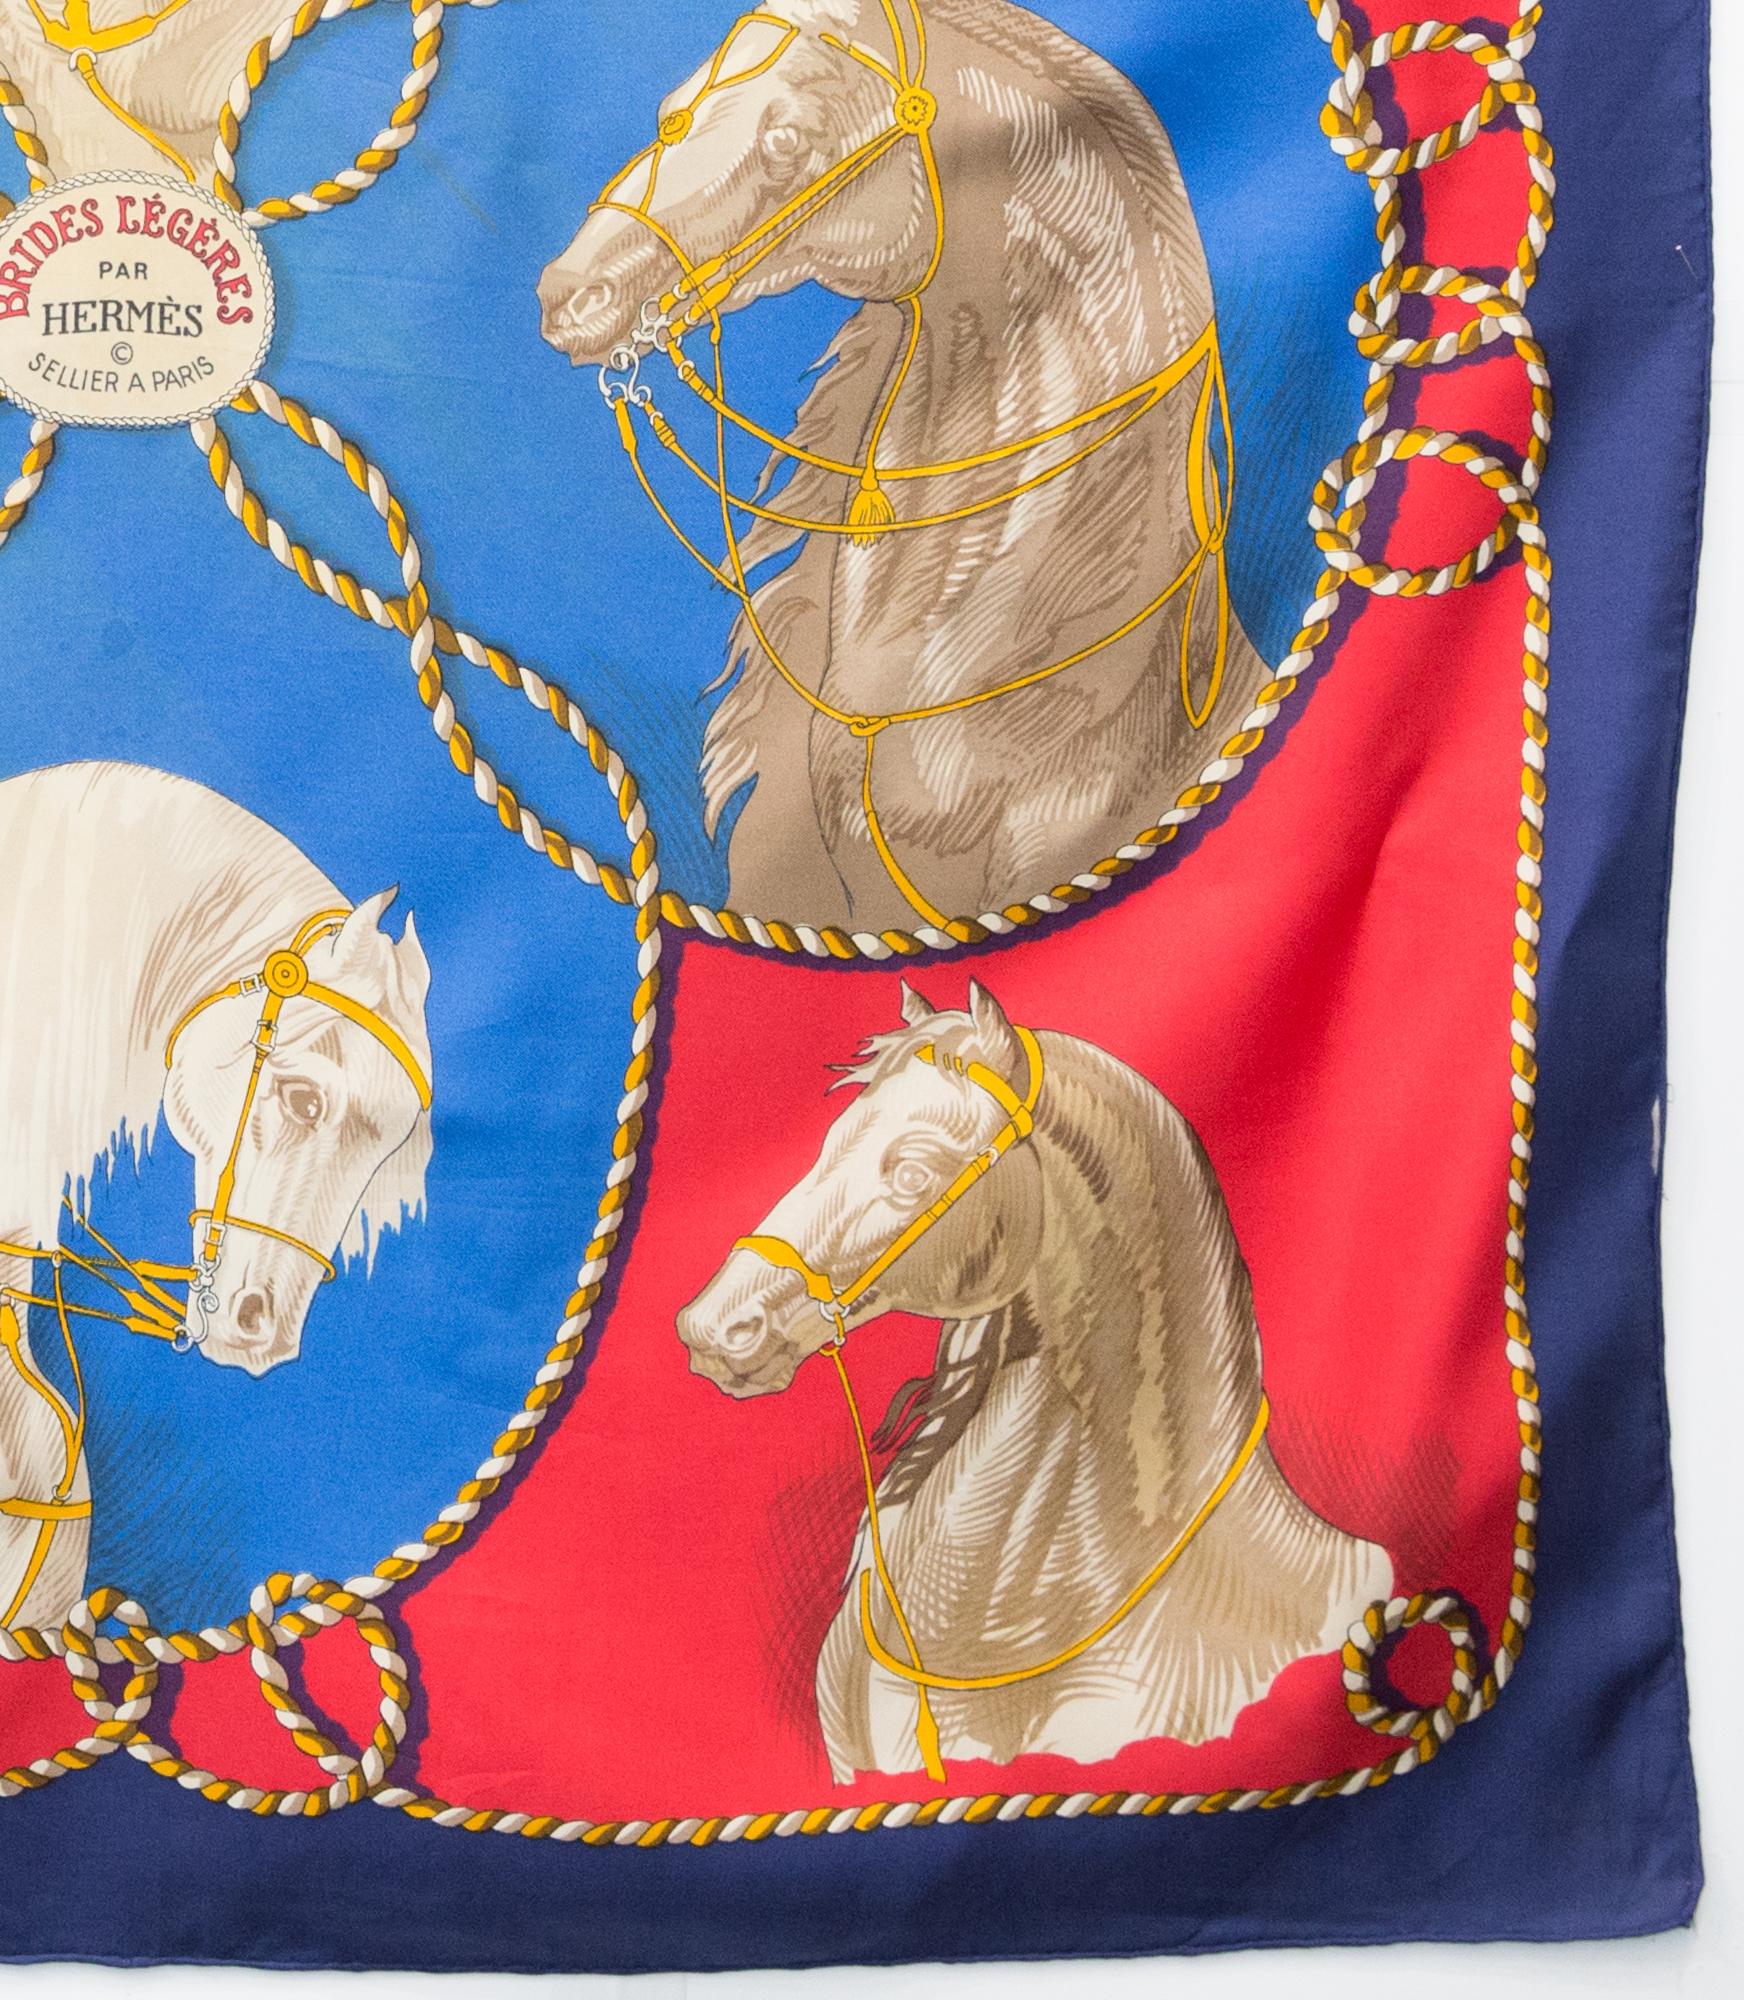 Hermes Blue and Red Brides Legeres by F Heron Silk Scarf In Good Condition For Sale In Paris, FR